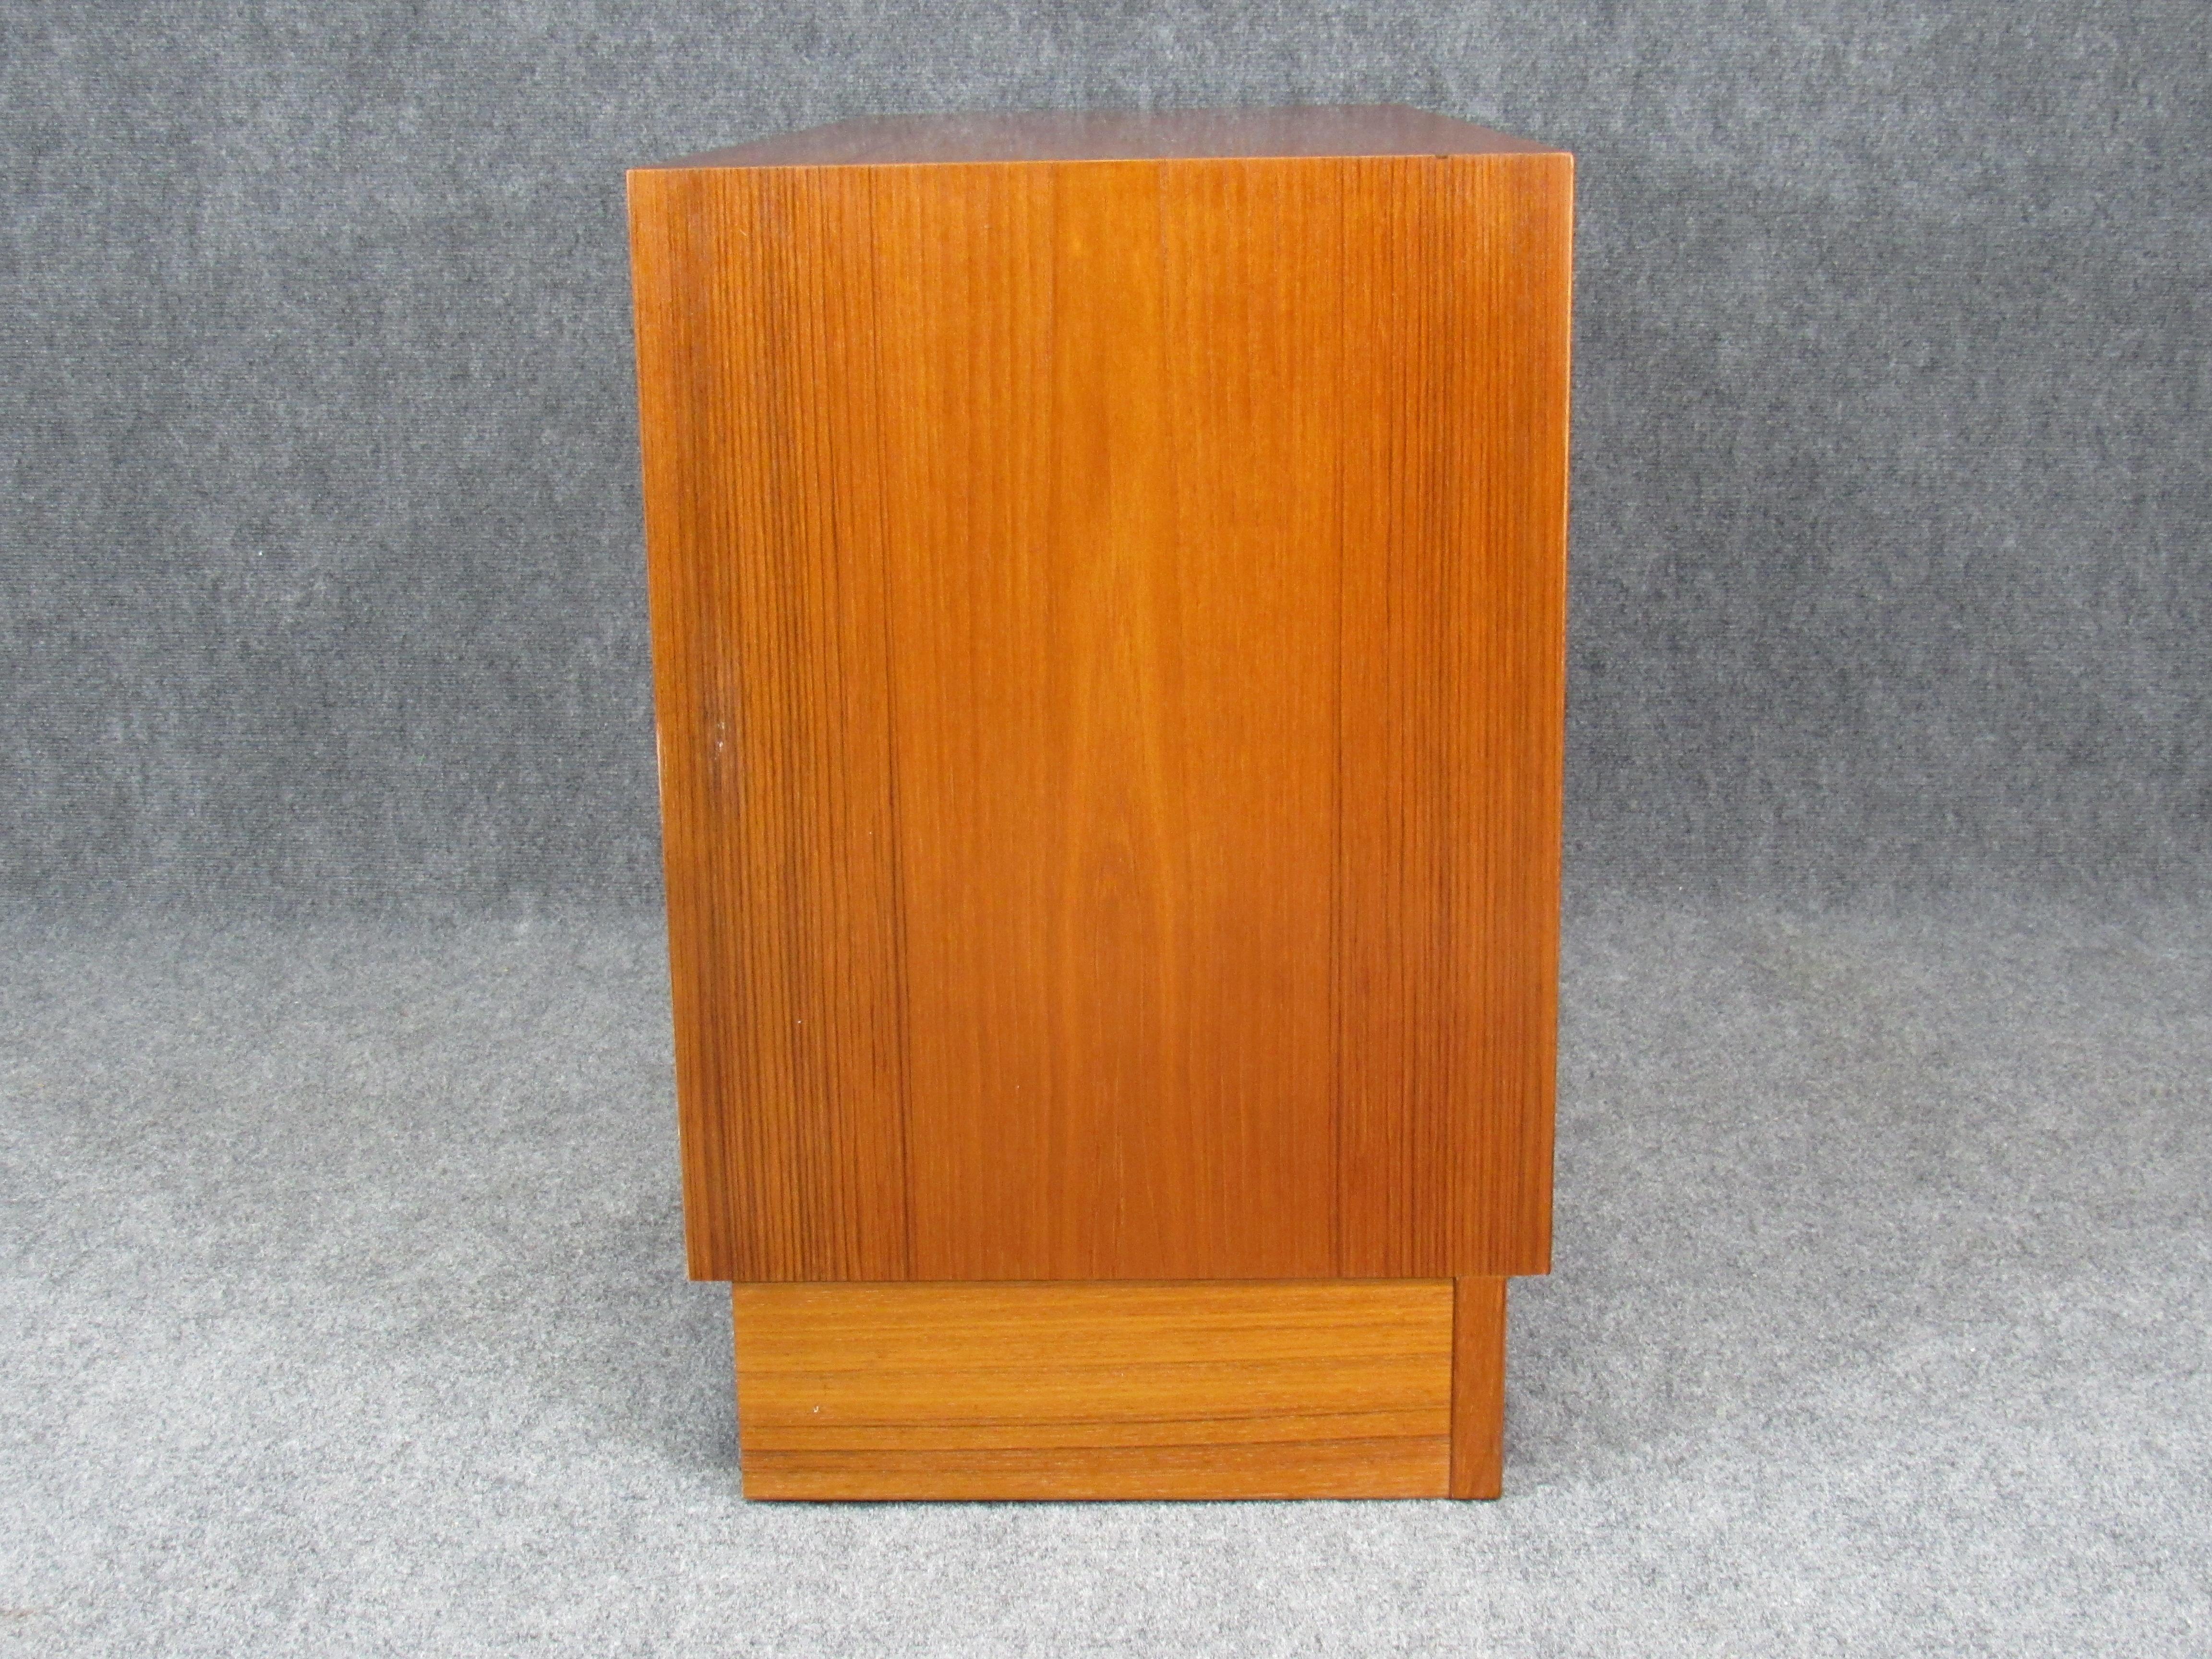 Mid-20th Century Pair of Midcentury, Danish Modern Teak Credenzas by Poul Hundevad for HU For Sale